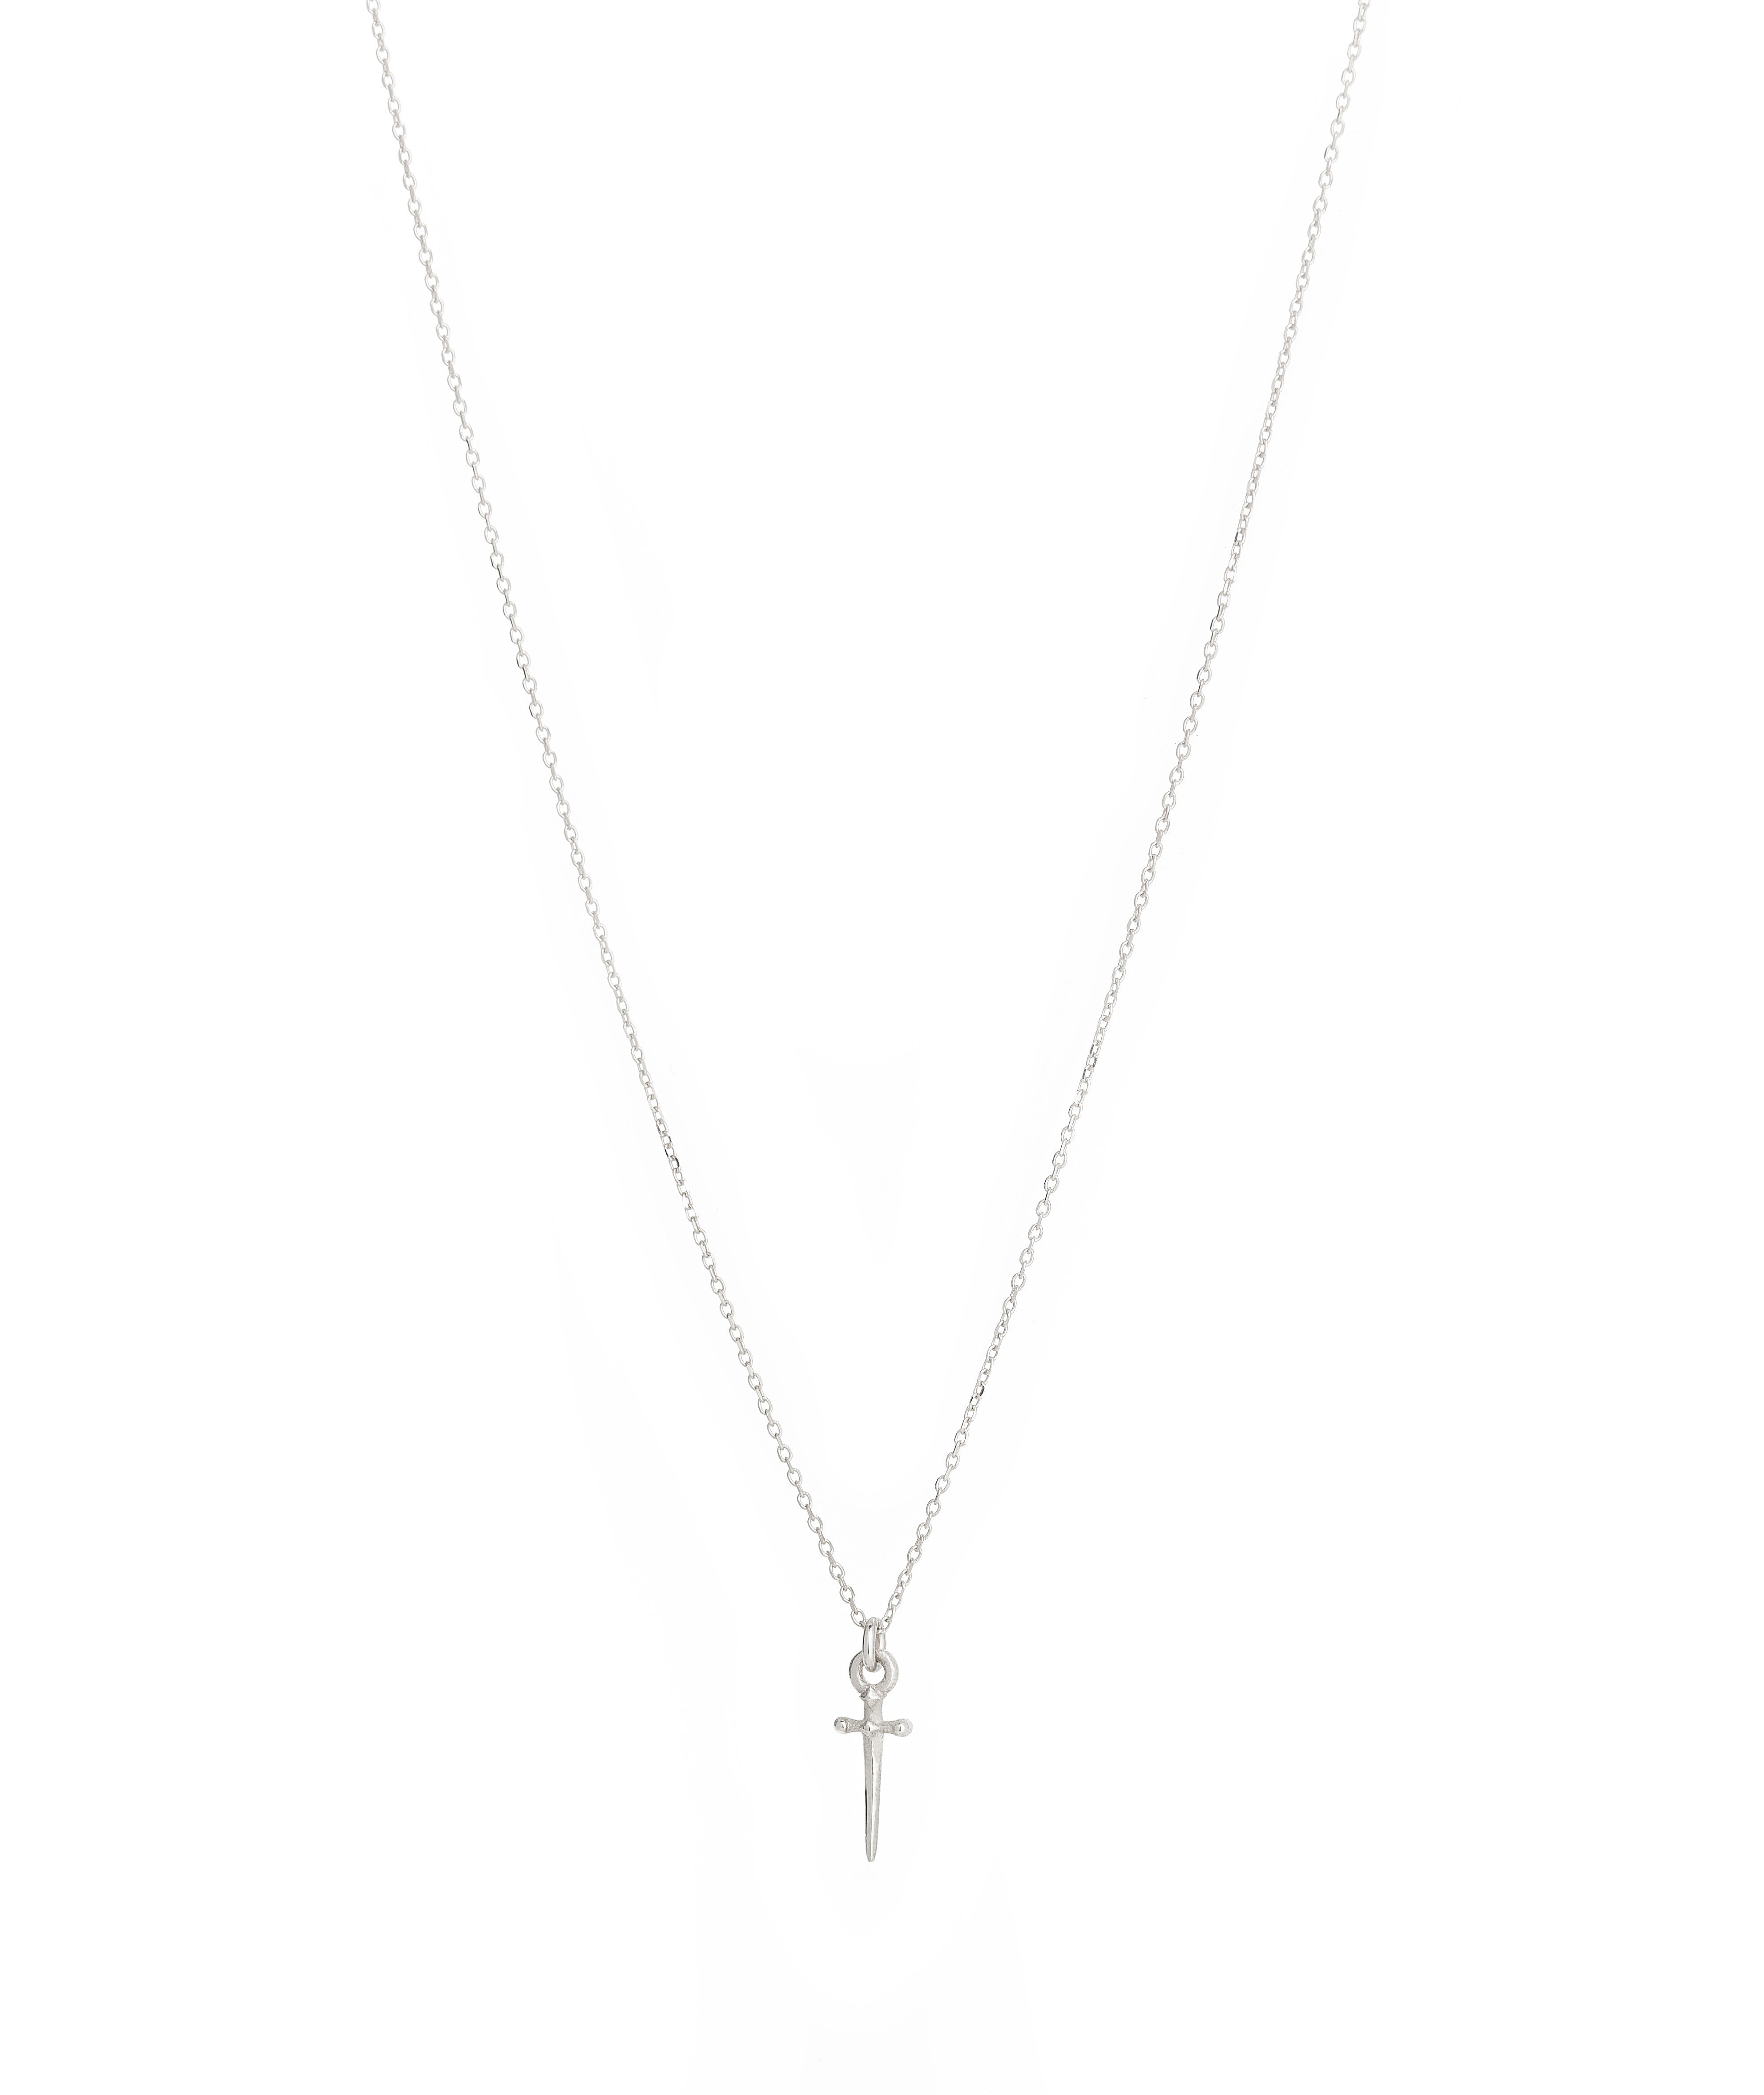 Itty Bitty Sword Necklace